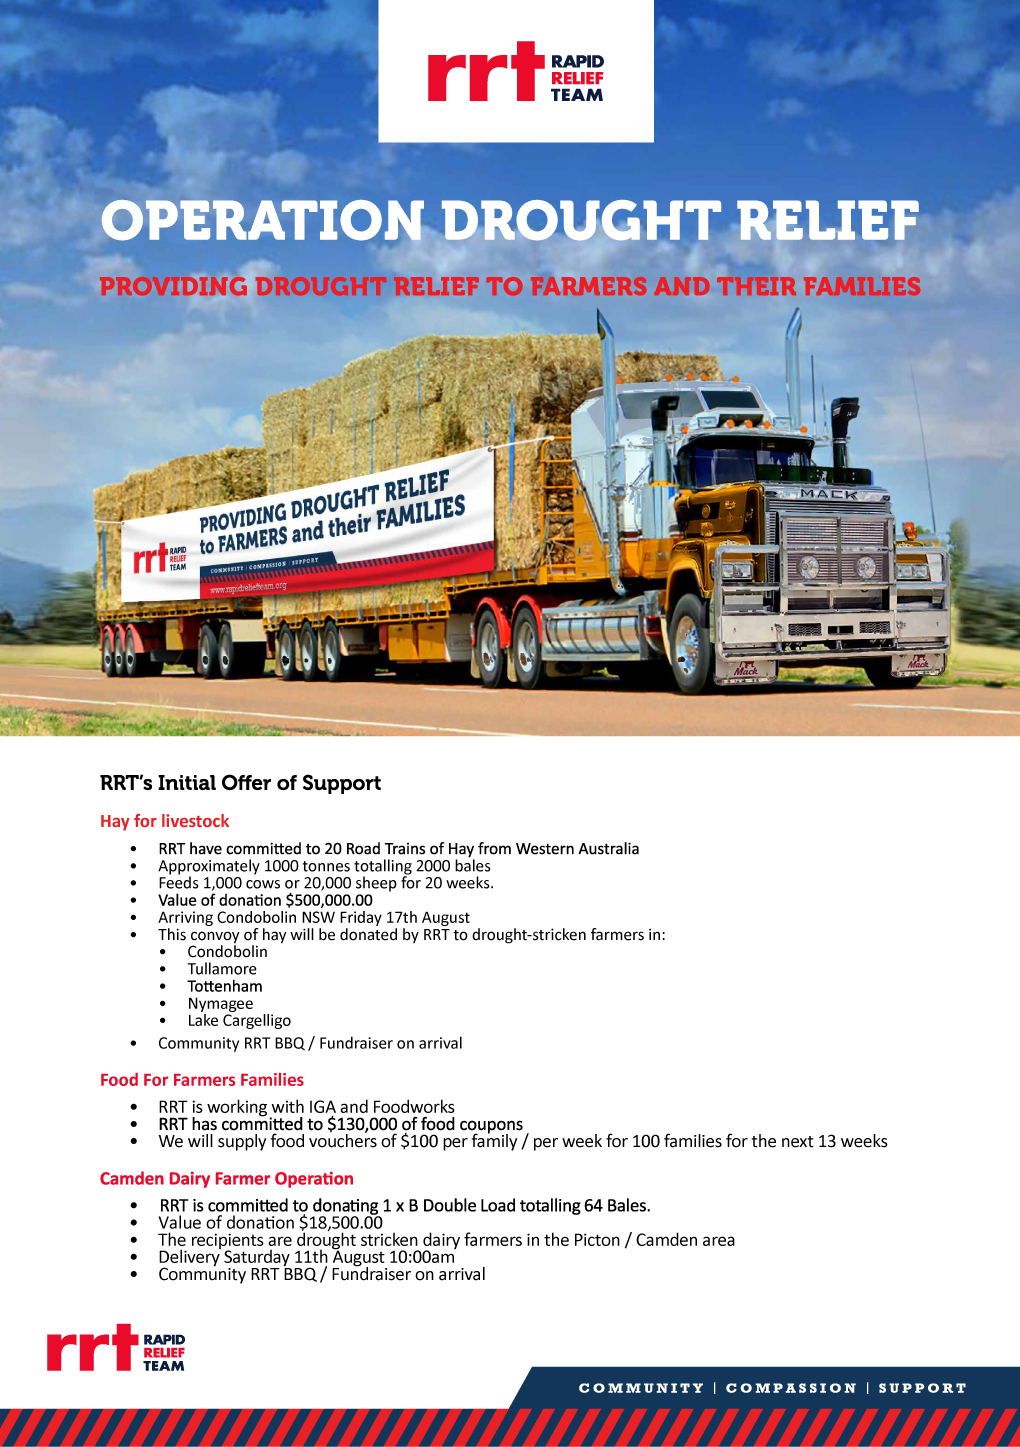 Bryson supports the RRT with Operation Drought Relief